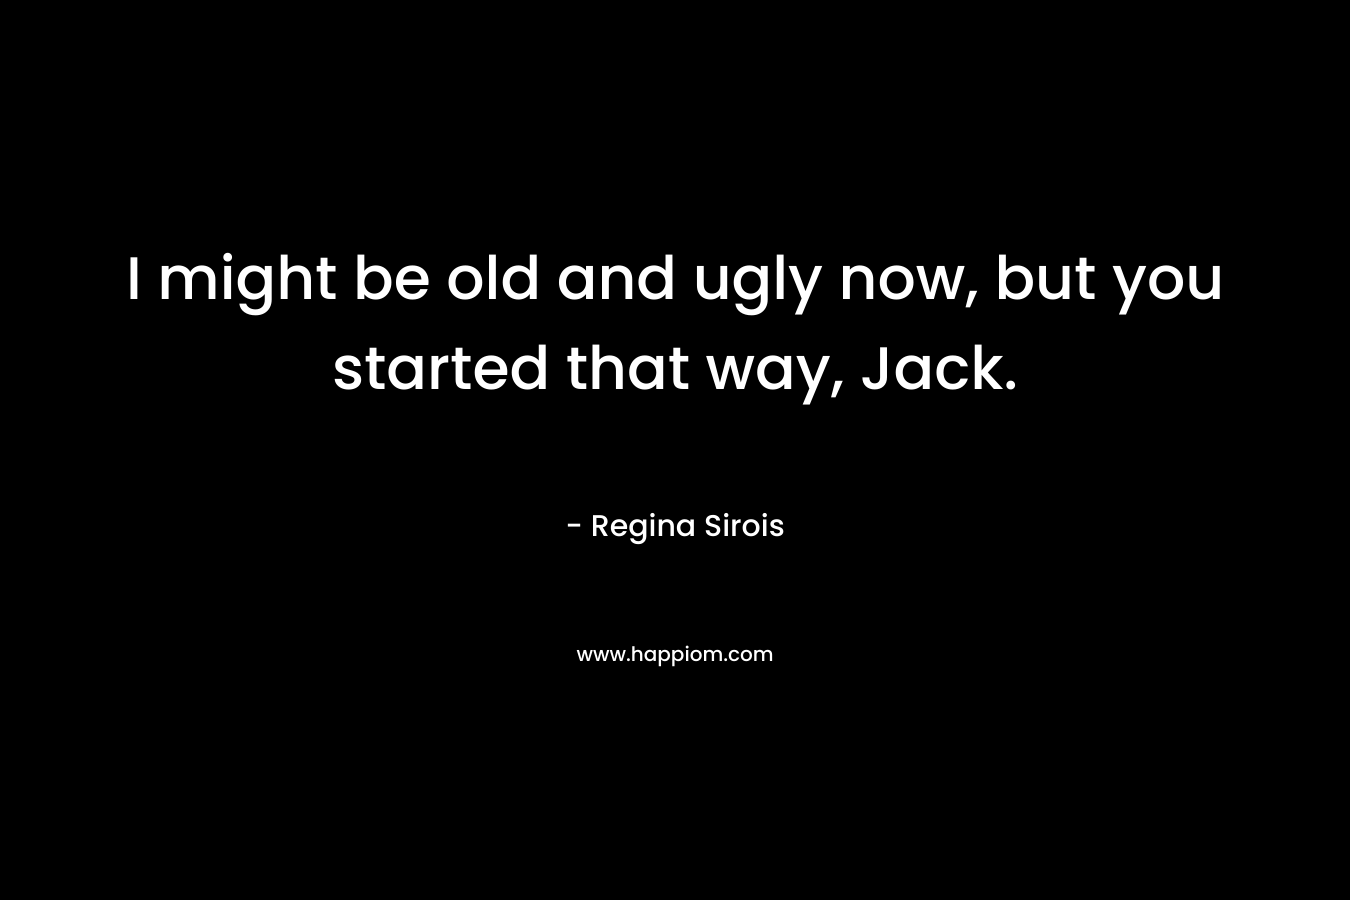 I might be old and ugly now, but you started that way, Jack. – Regina Sirois